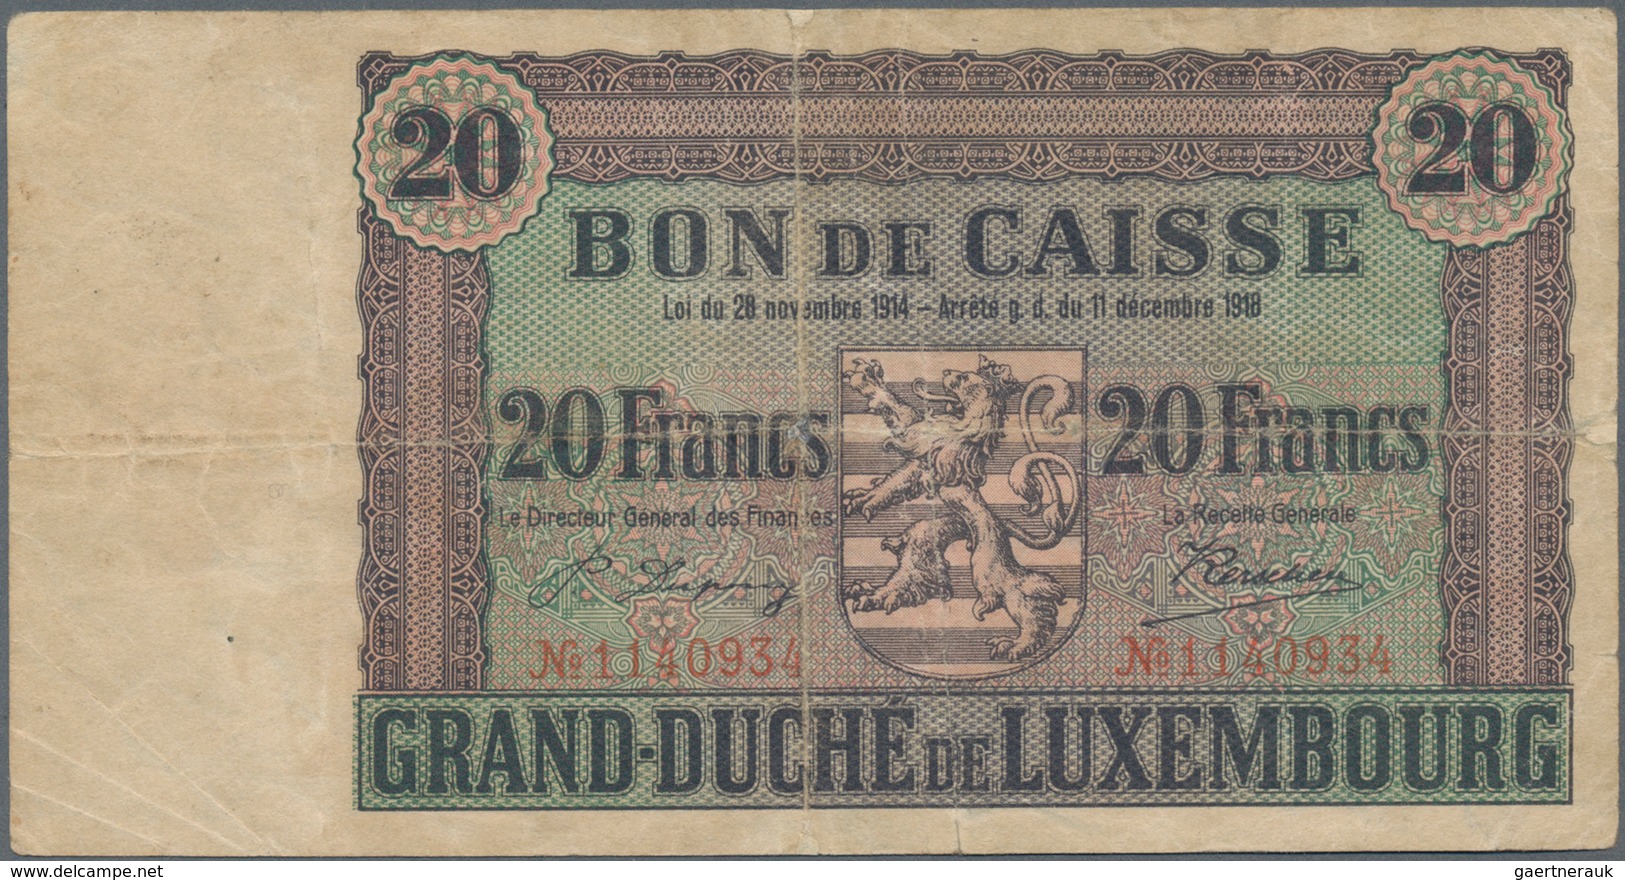 Luxembourg: Grand-Duché De Luxembourg 20 Francs L. 28.11.1914 & 08.09.1918 (1926), P.35, Highly Rare - Luxembourg